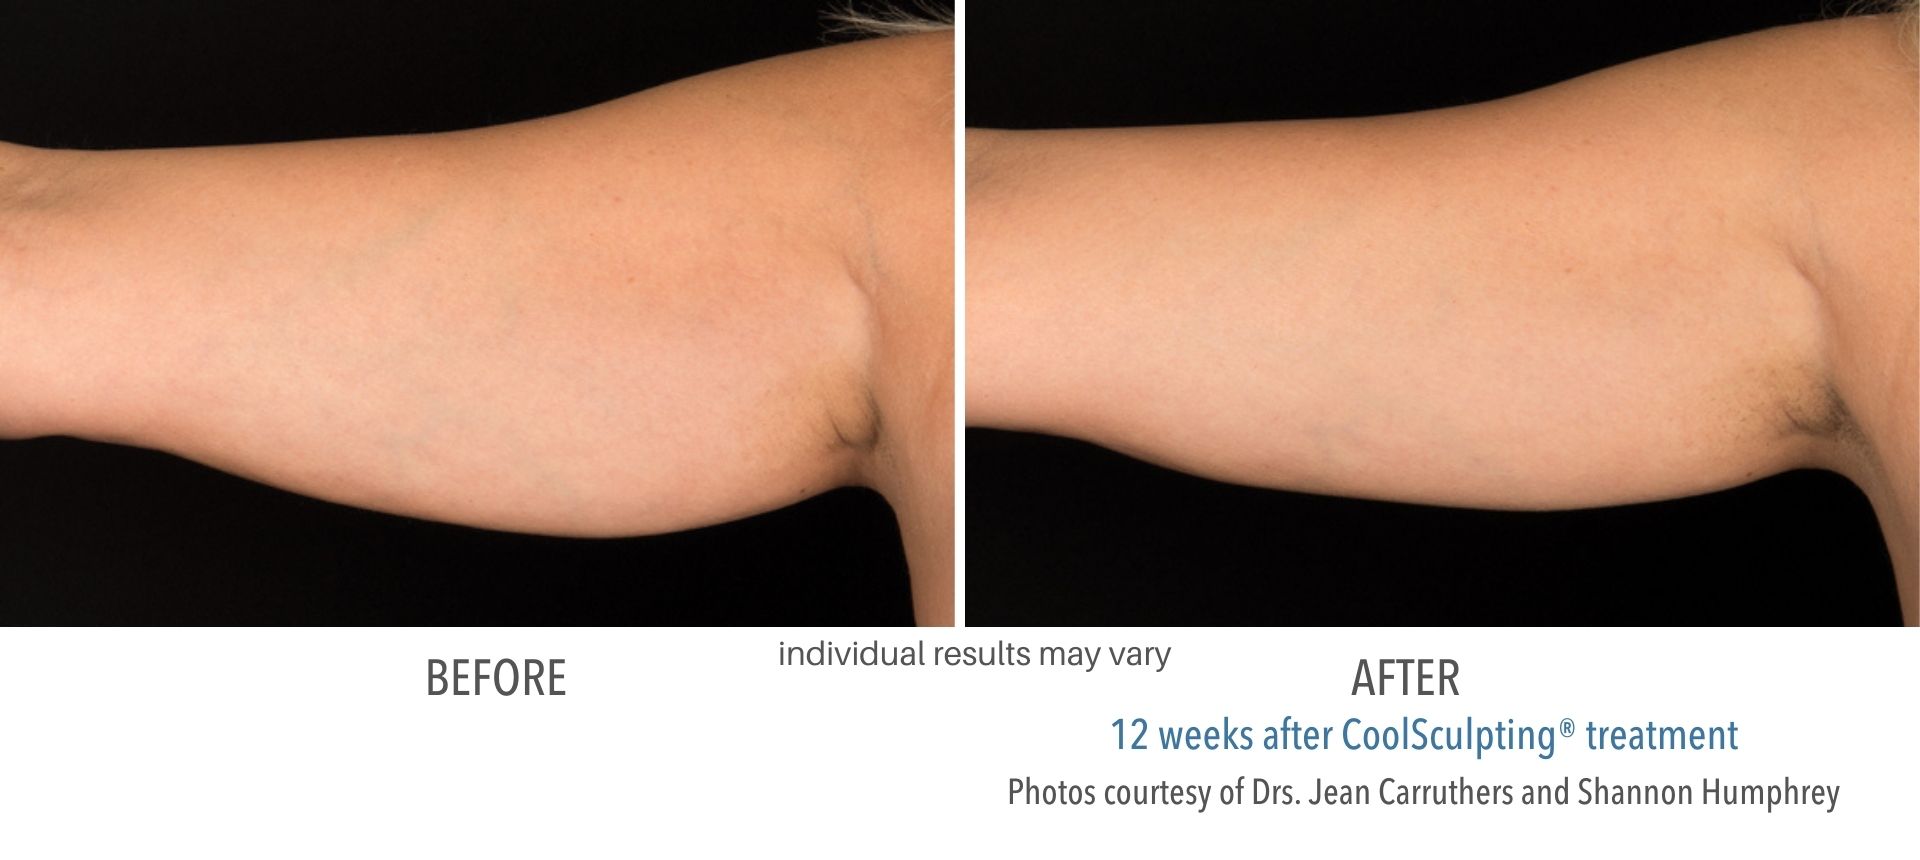 CoolSculpting arms treatment in Westlake, OH